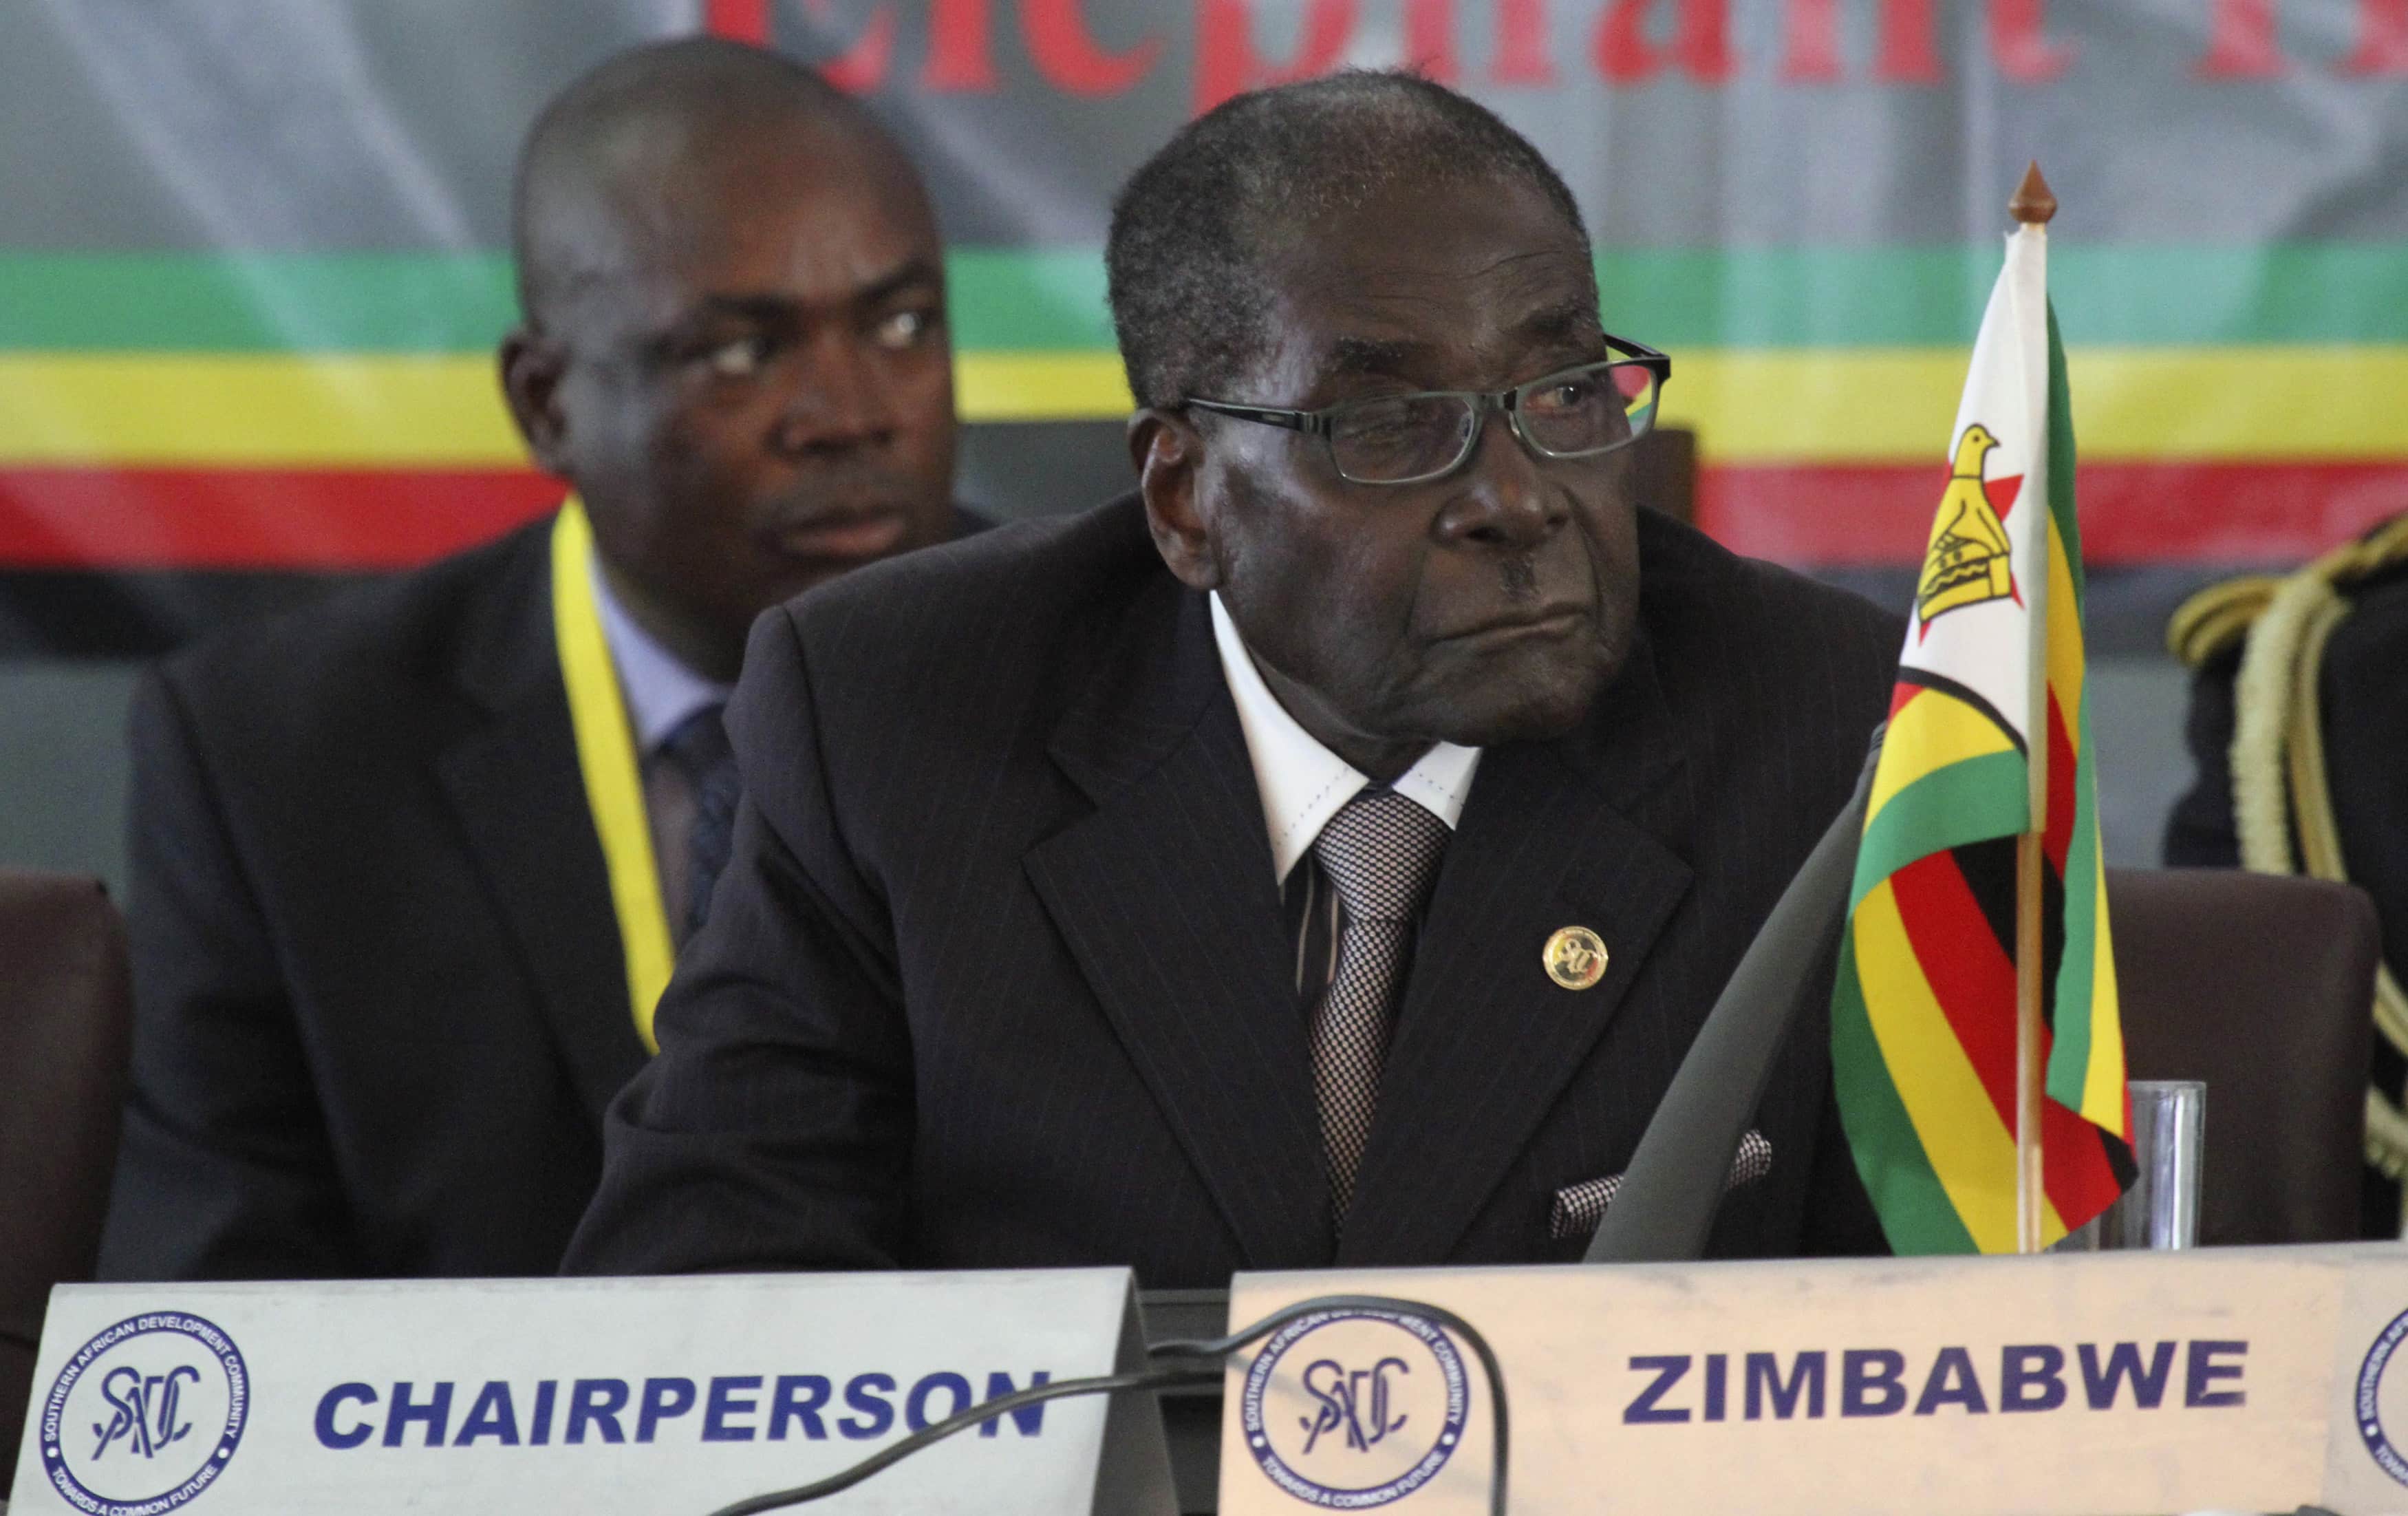 Zimbabwe's President Robert Mugabe listens to speakers at the 34th Southern African Development Conference (SADC) summit in Victoria Falls, 17 August 2014, REUTERS/Philimon Bulawayo